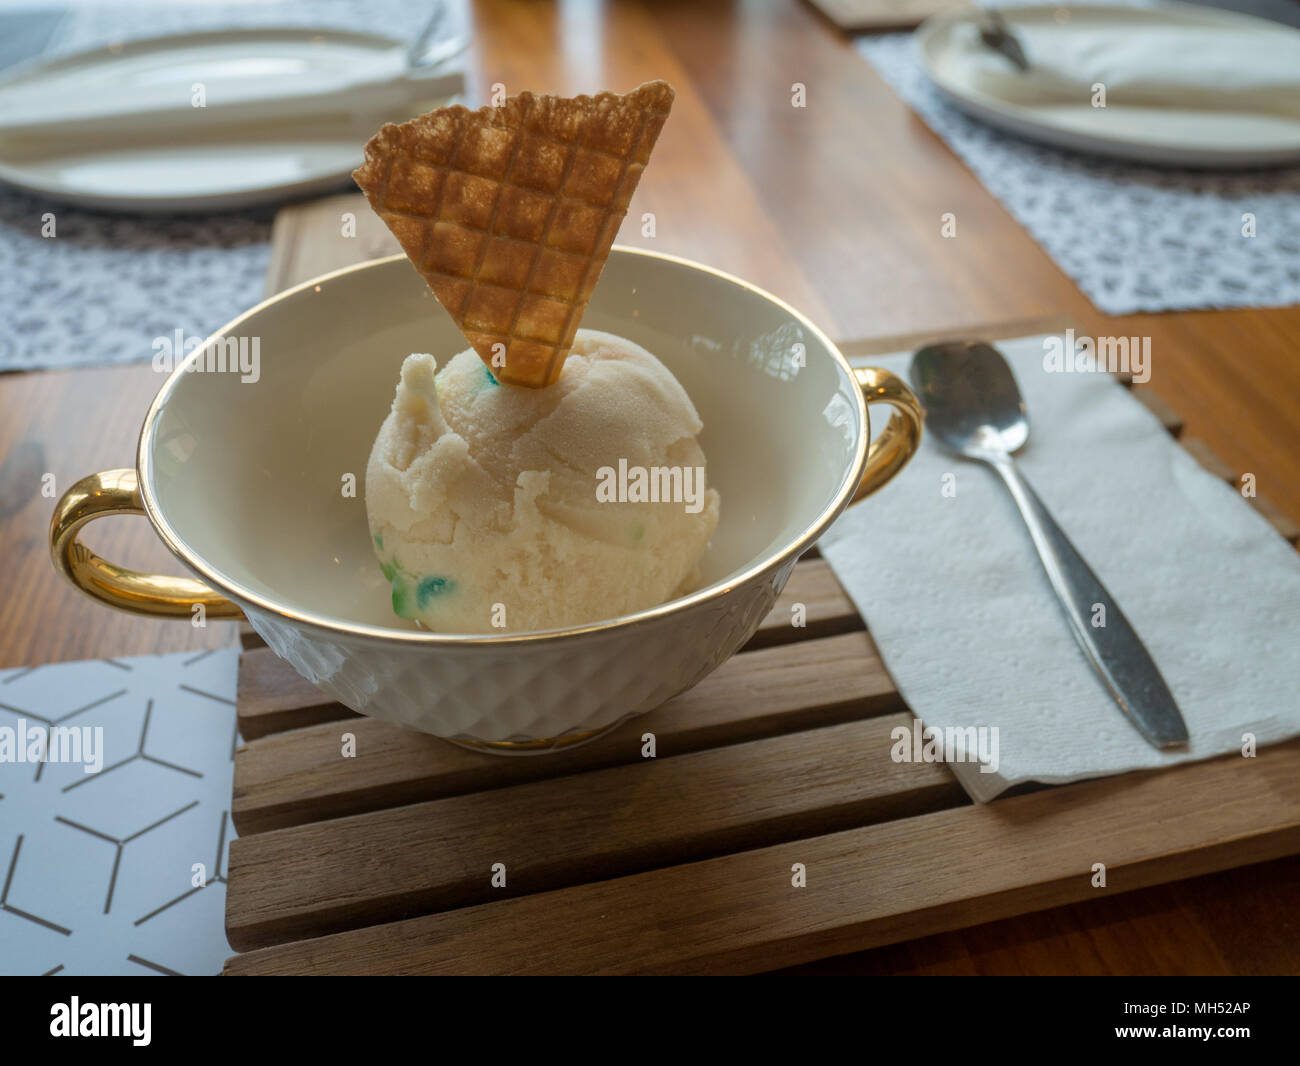 Ice cream vanilla 1 scoop in a cup of luxury with spoon on wooden table in restaurant. Stock Photo